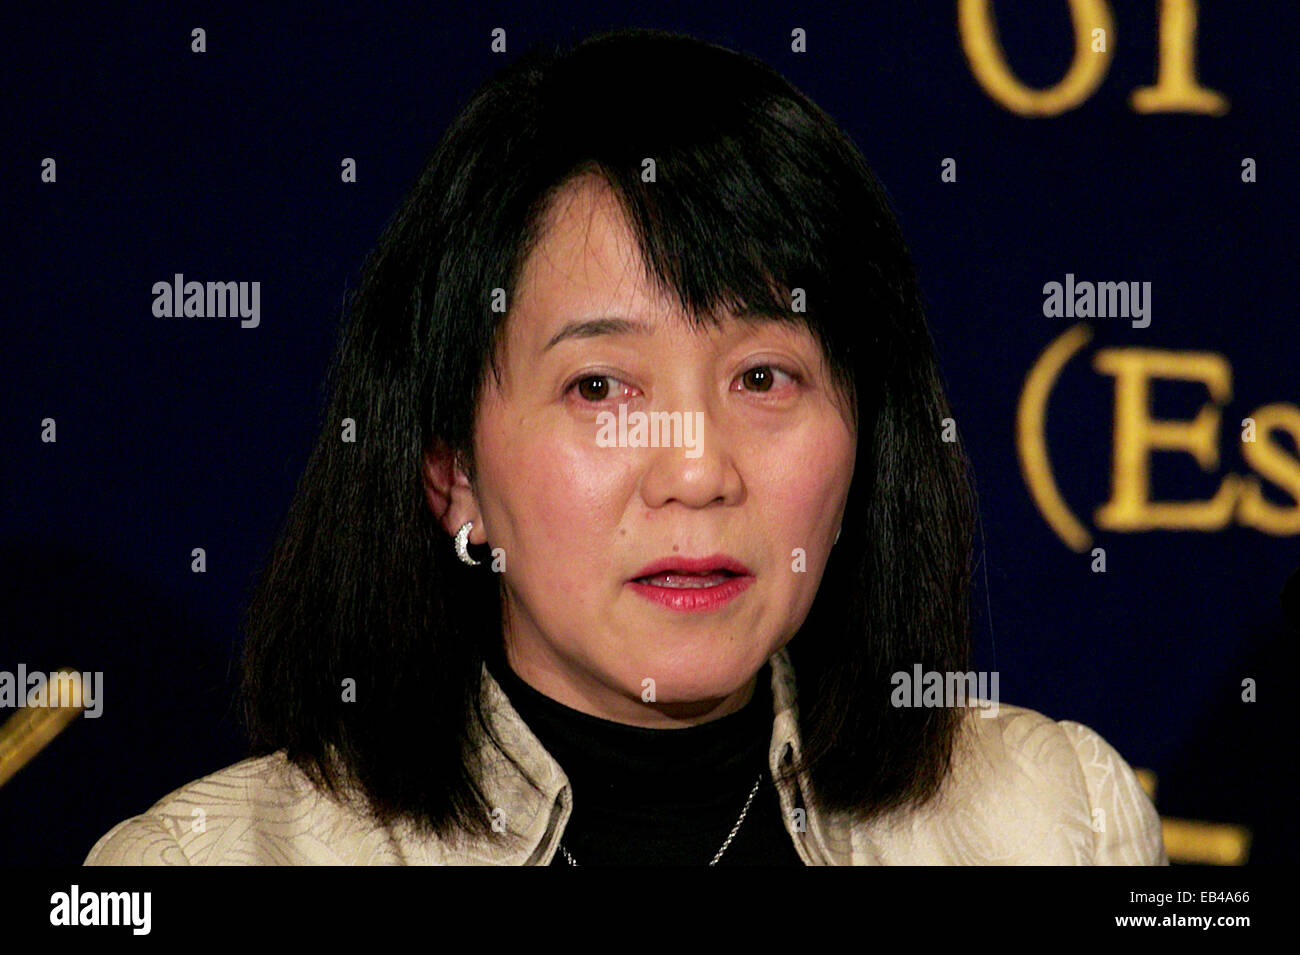 Tokyo, Japan. 26th Nov, 2014. Masayo Takahashi Project Leader of Laboratory for Retinal Regeneration Center for Developmental Biology, RIKEN speaks at the Foreign Correspondents' Club of Japan on November 26, 2014 in Tokyo, Japan. The leader of the First Ever In-human Clinical Study iPS Cells spoke about the medical future applications of the iPS (induced pluripotent stems) cells. Her team implanted as a first time into the eye of an elderly patient suffering from macular degeneration last September. Takahashi's team and Nobel Prize winner Shinya Yamanaka, who discovered how to create Stock Photo